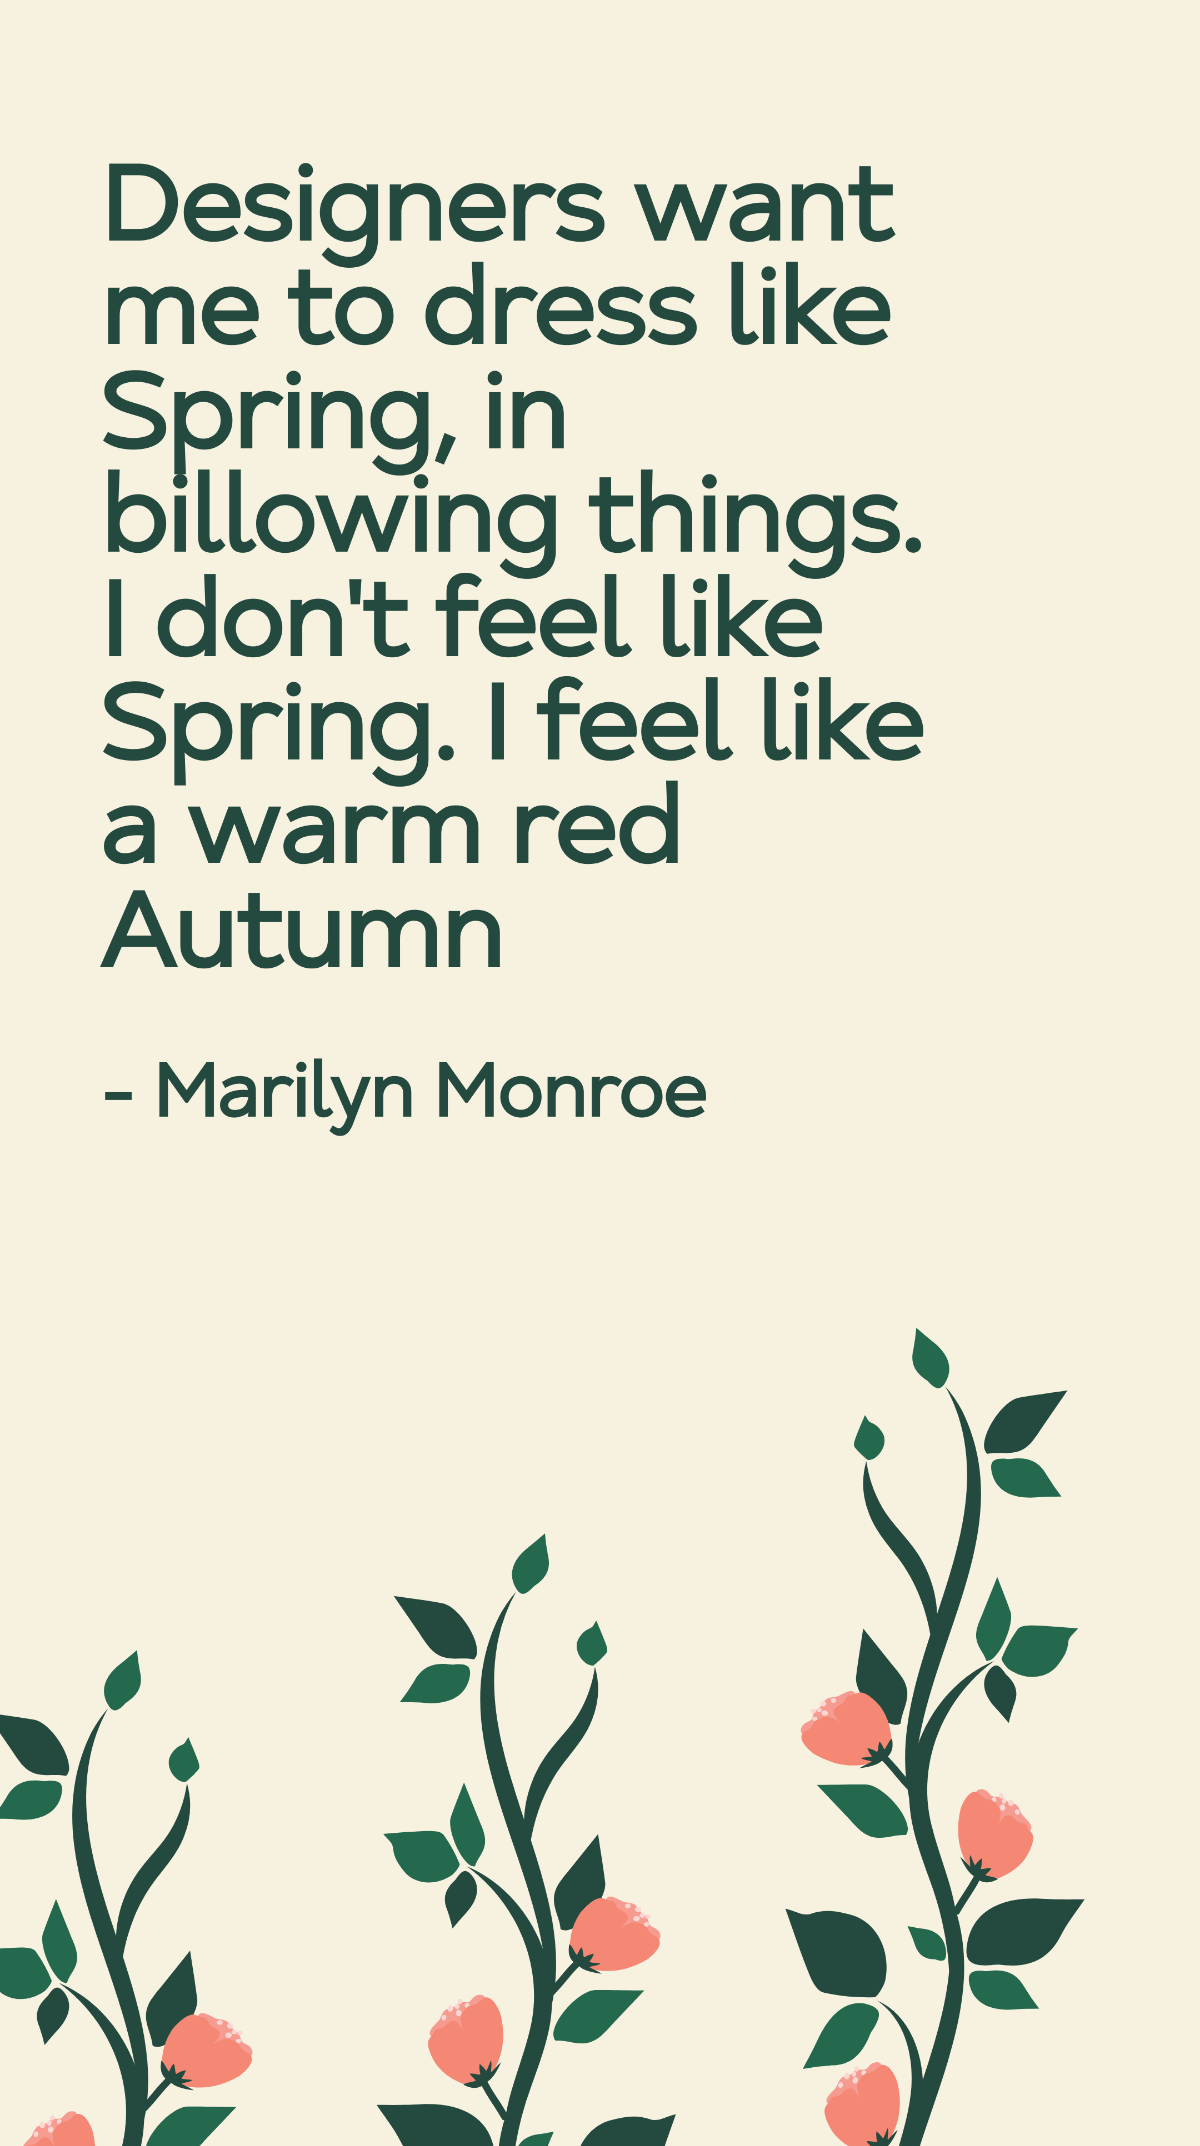 Free Marilyn Monroe - Designers want me to dress like Spring, in billowing things. I don't feel like Spring. I feel like a warm red Autumn Template